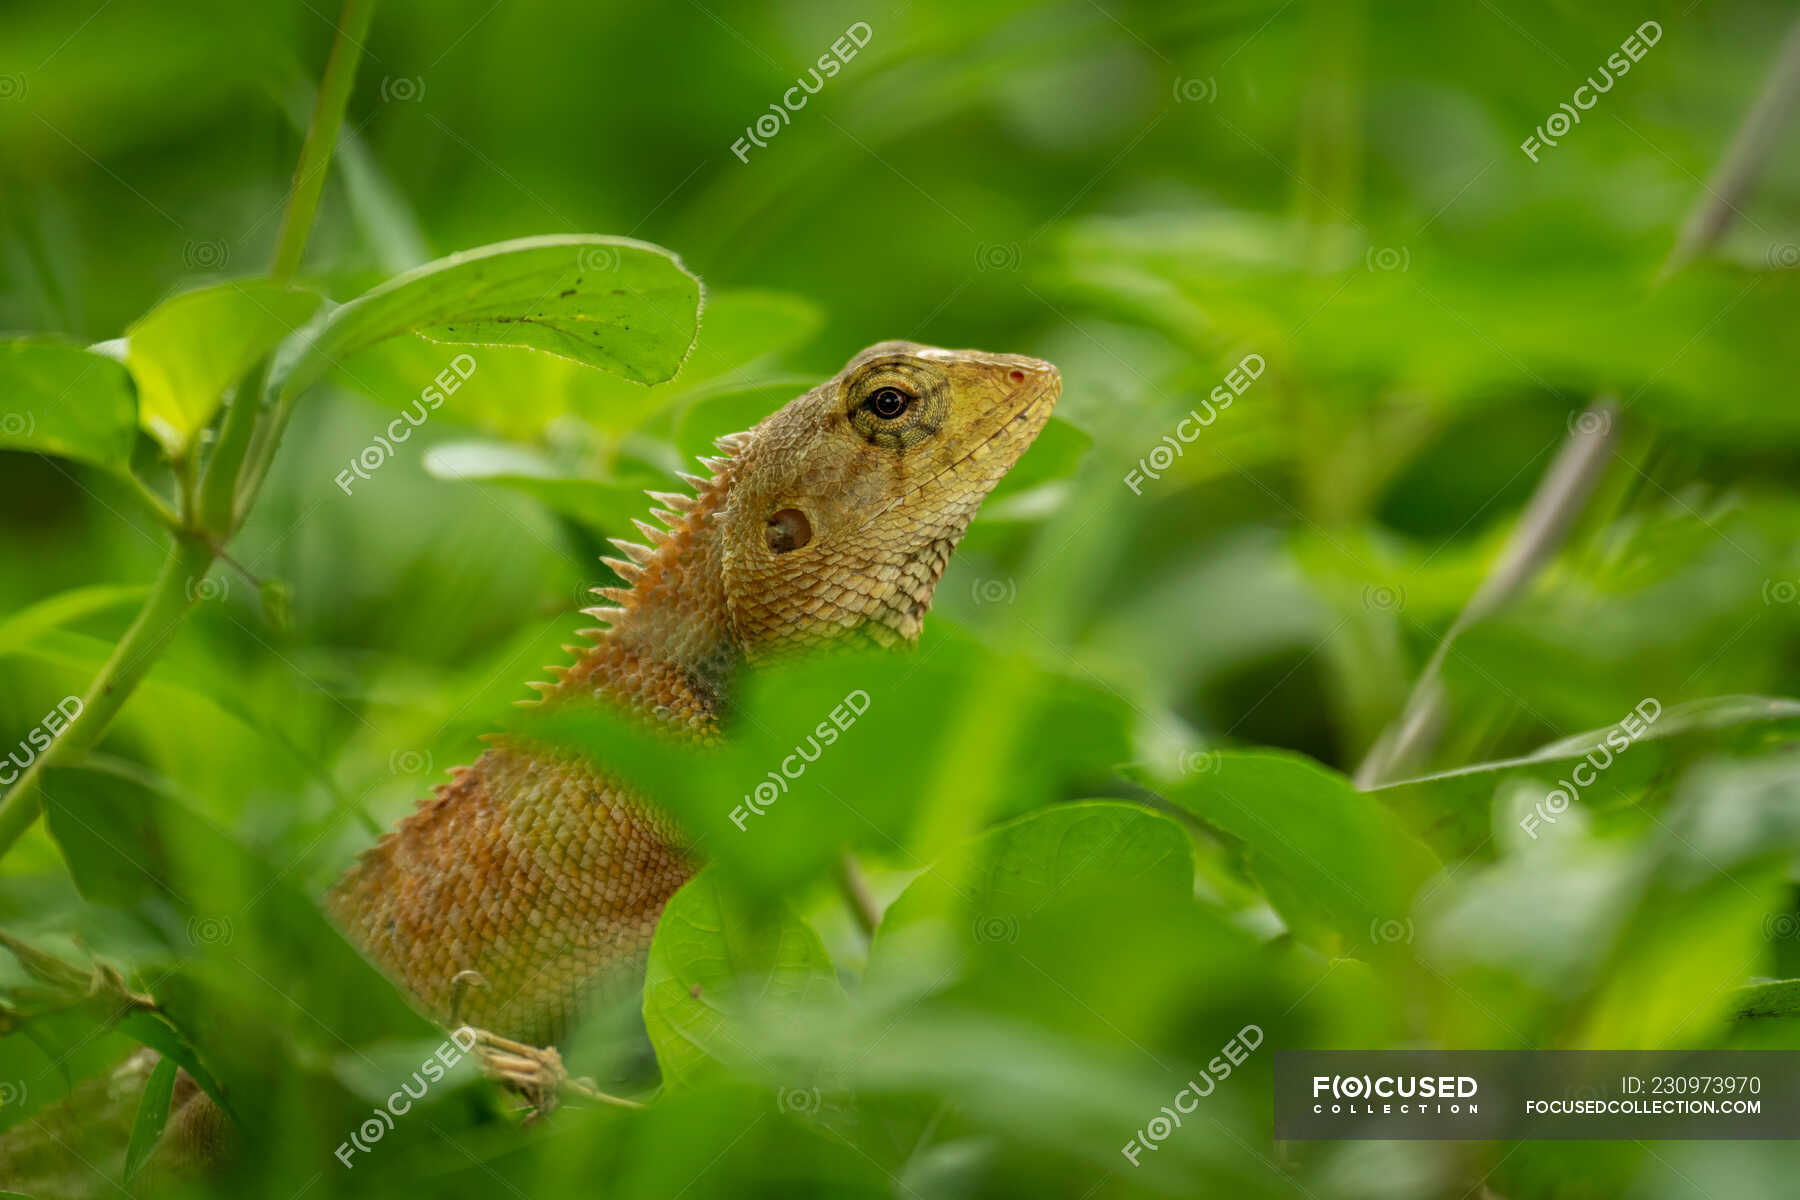 Close Up Of Oriental Garden Lizard Calotes Versicolor In Leaves Phnom Penh Phnom Penh Cambodia Outdoors Changeable Stock Photo 230973970